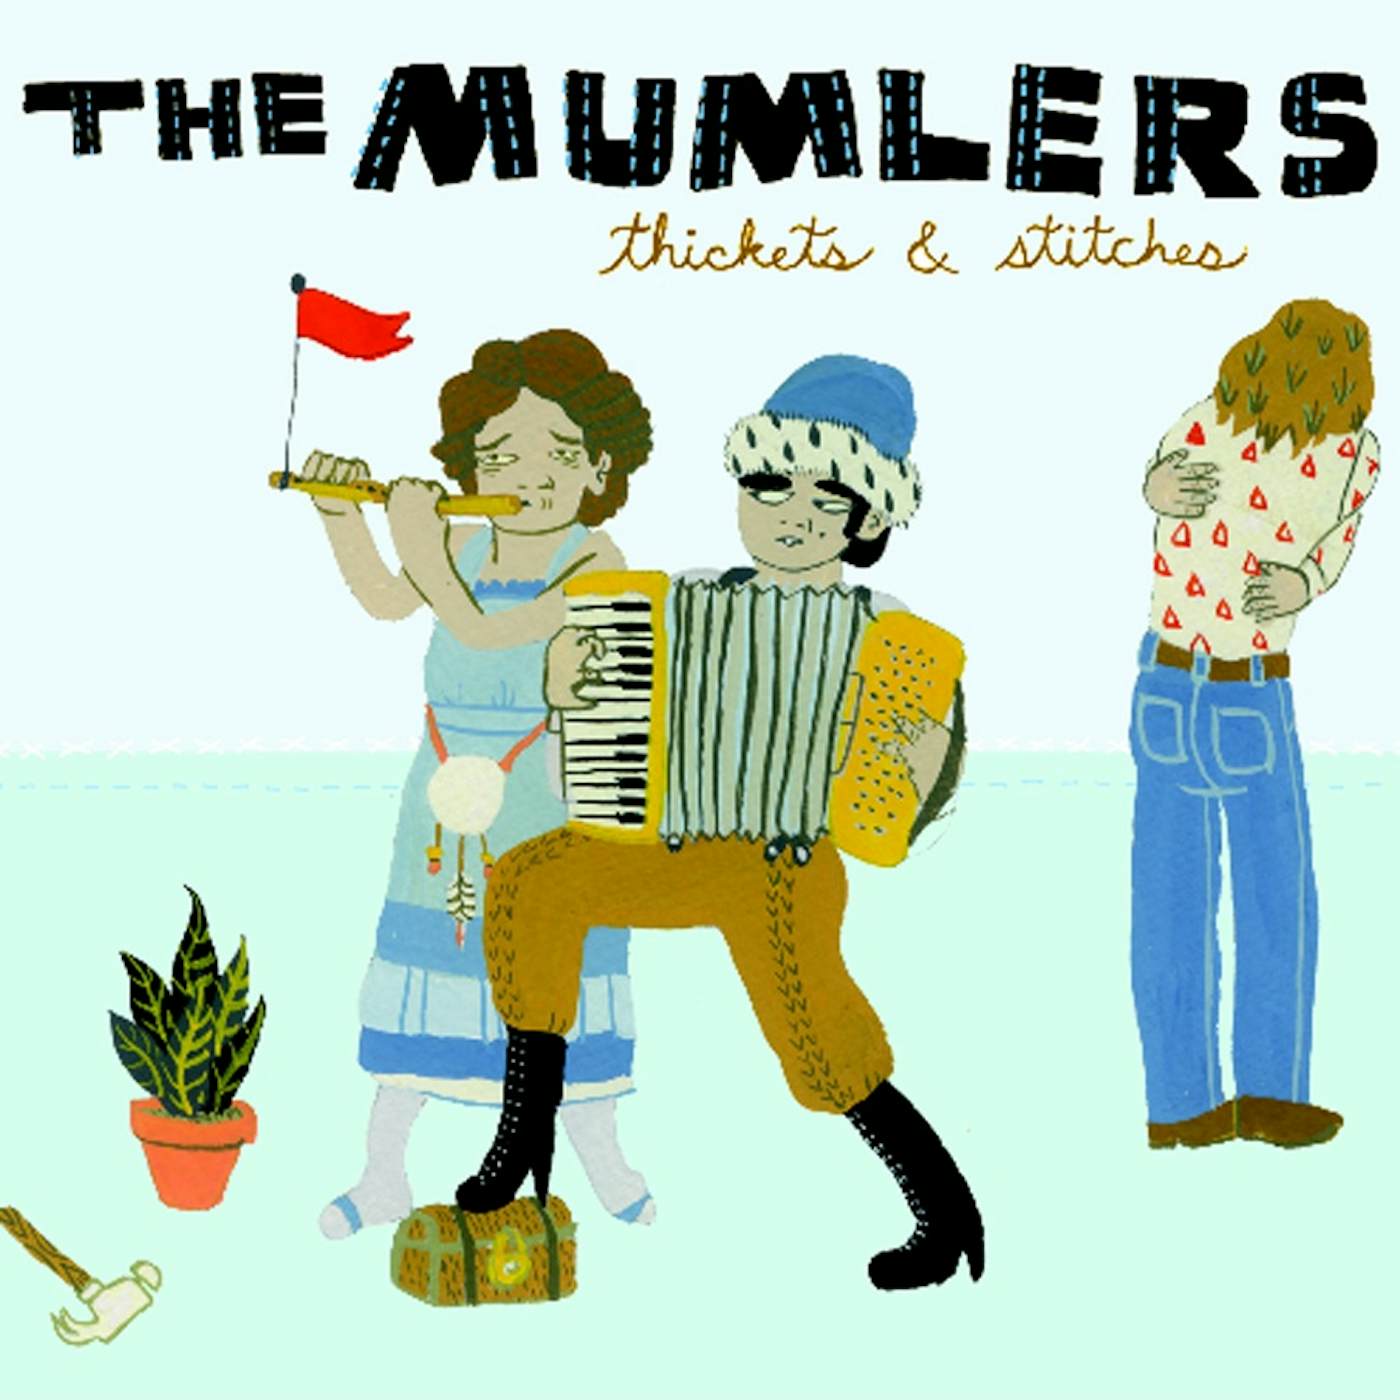 The Mumlers Thickets & Stitches Vinyl Record